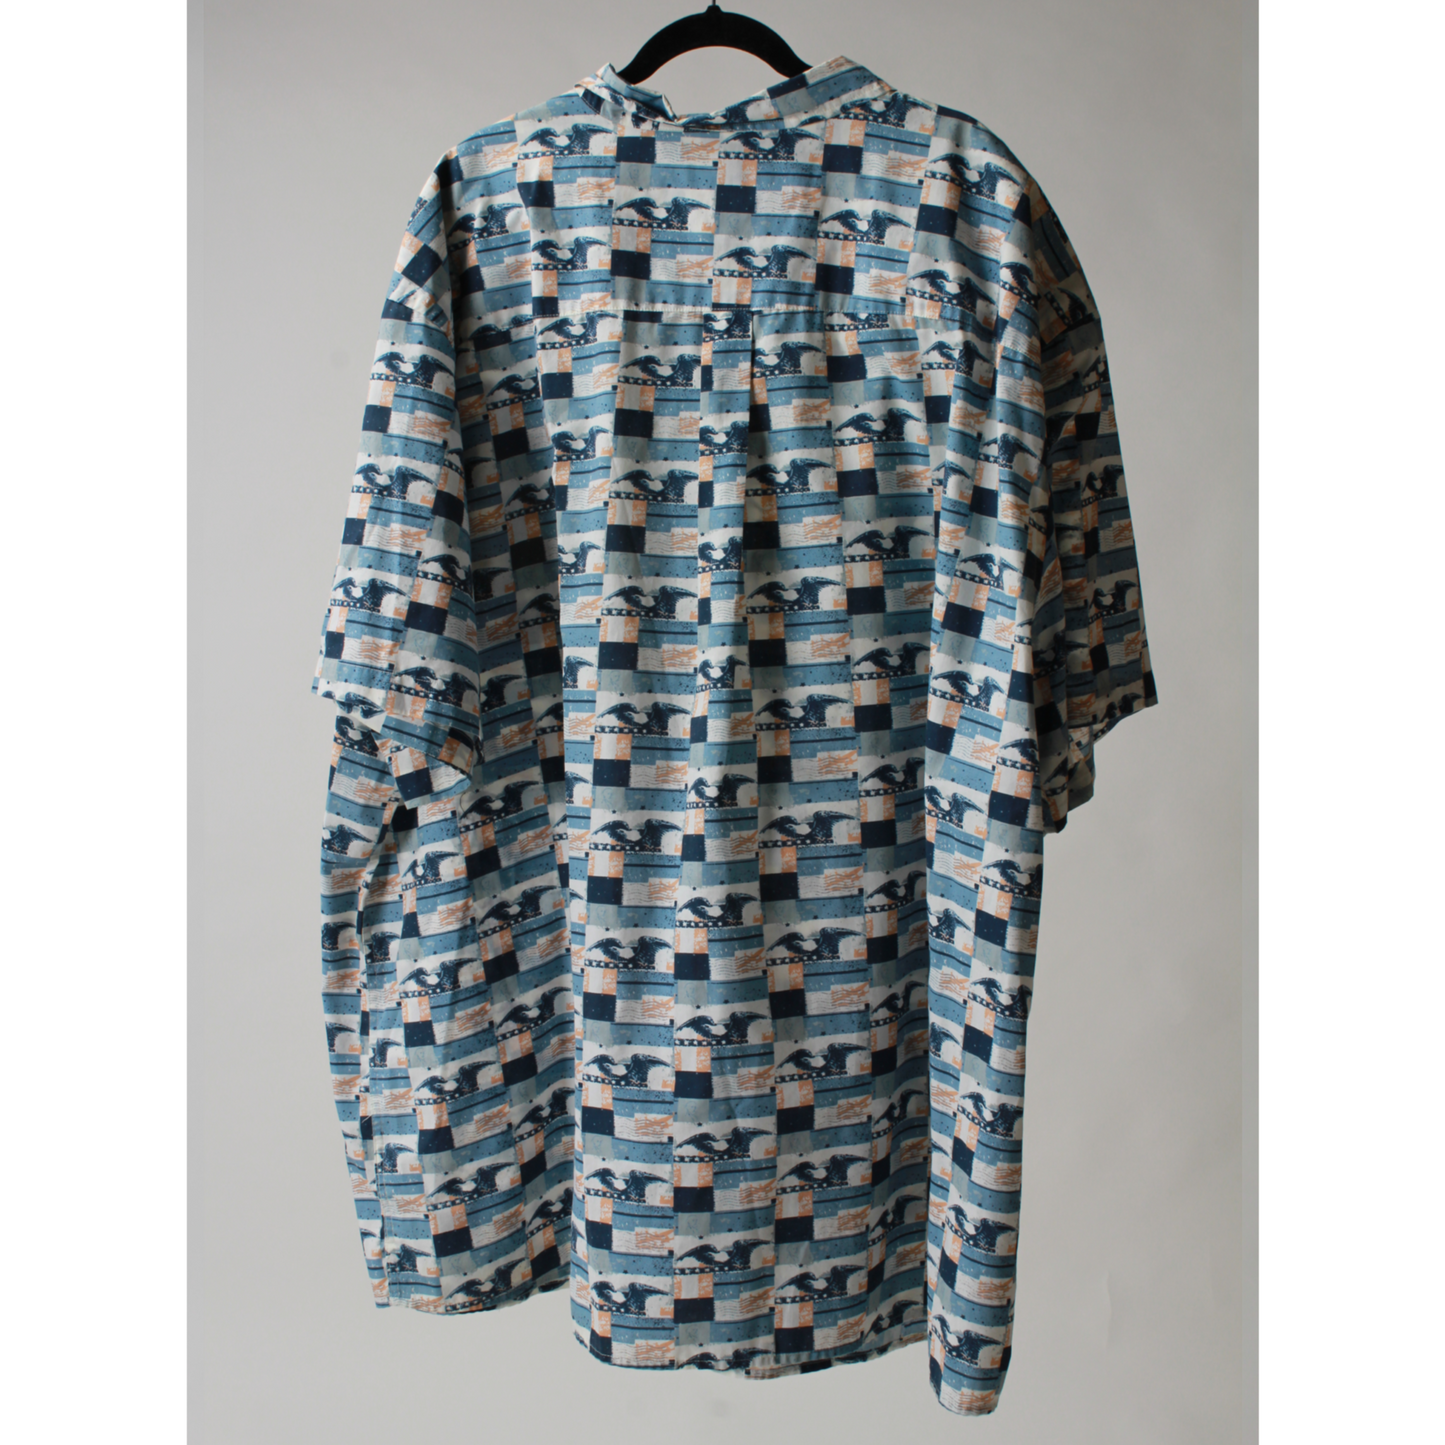 Patterned Button Up (5xL)